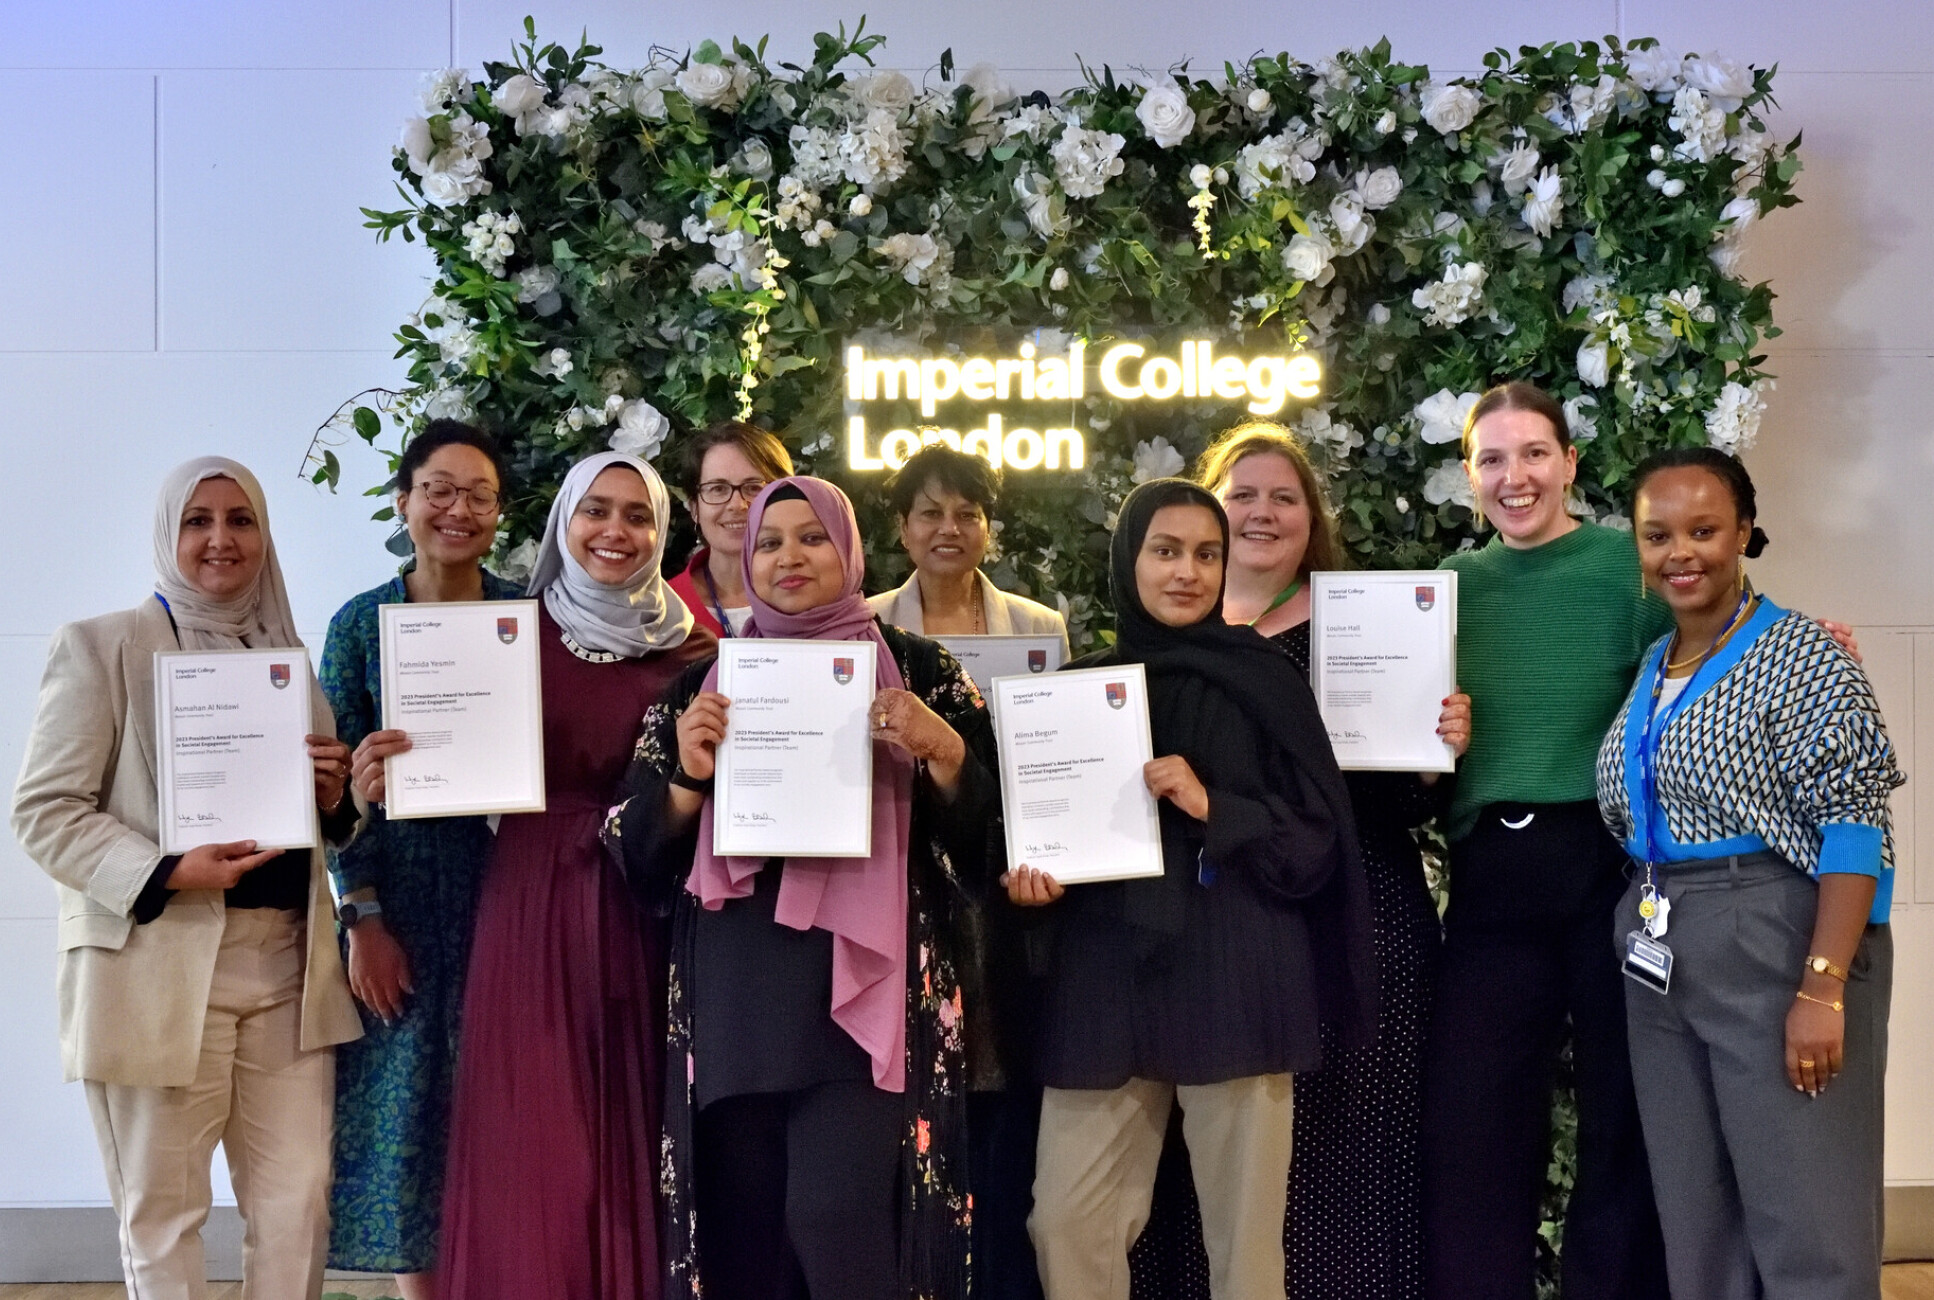 A group of ten women holding awards in front of an Imperial College London sign